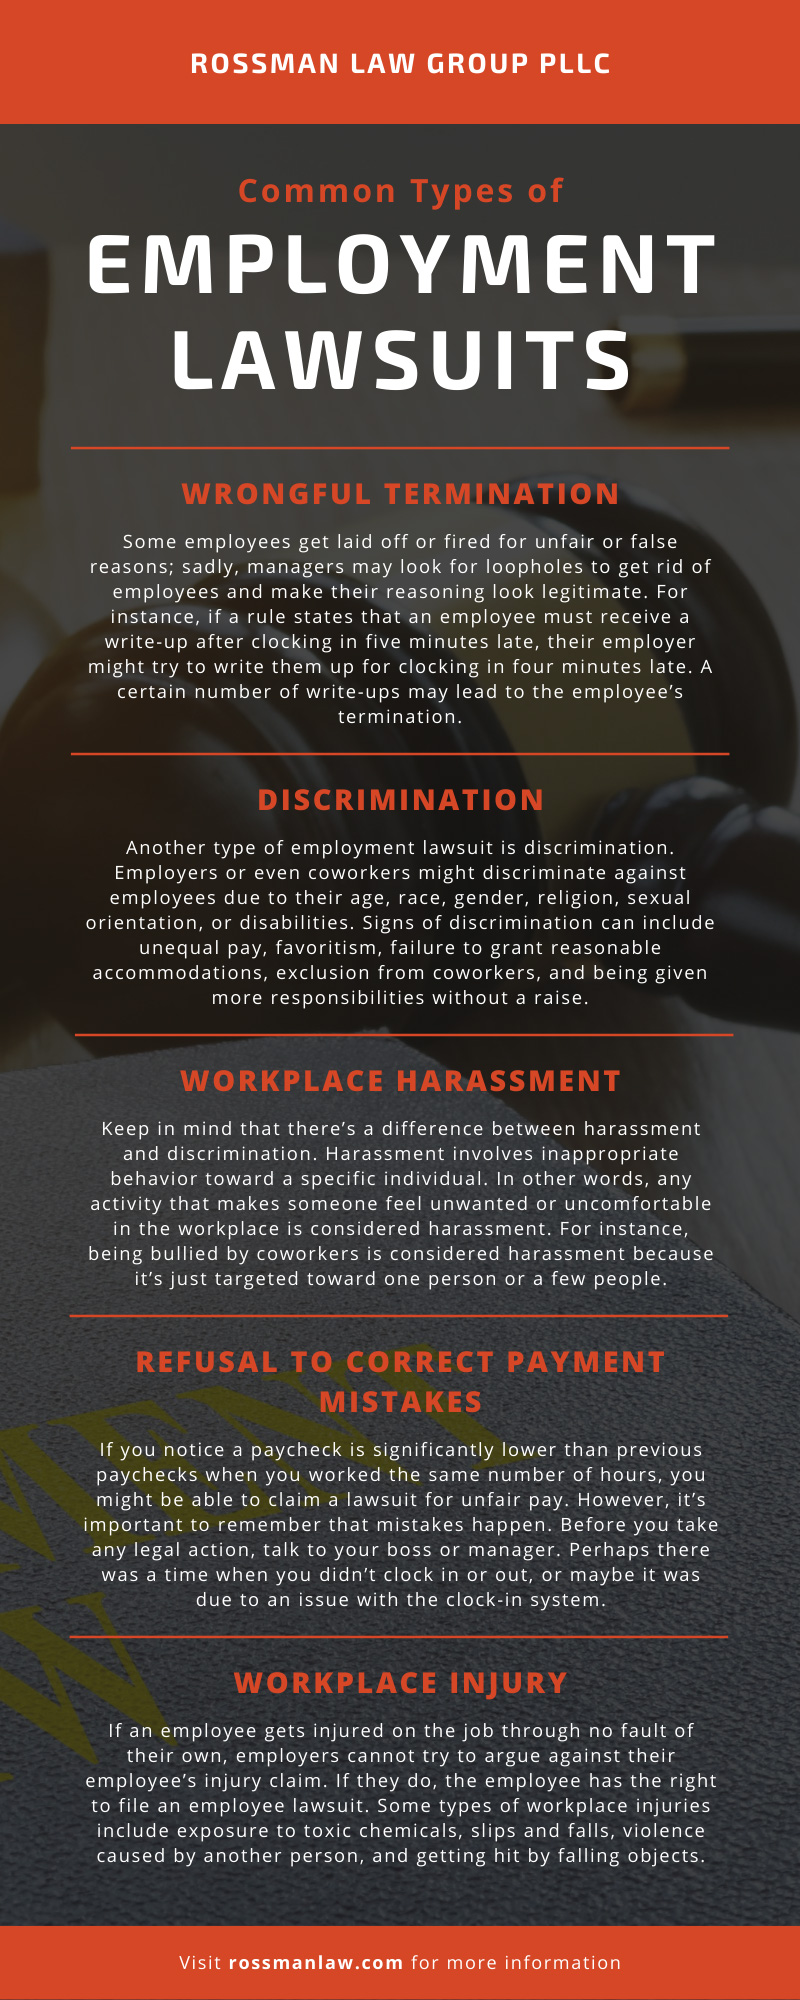 Types of Employment Lawsuits